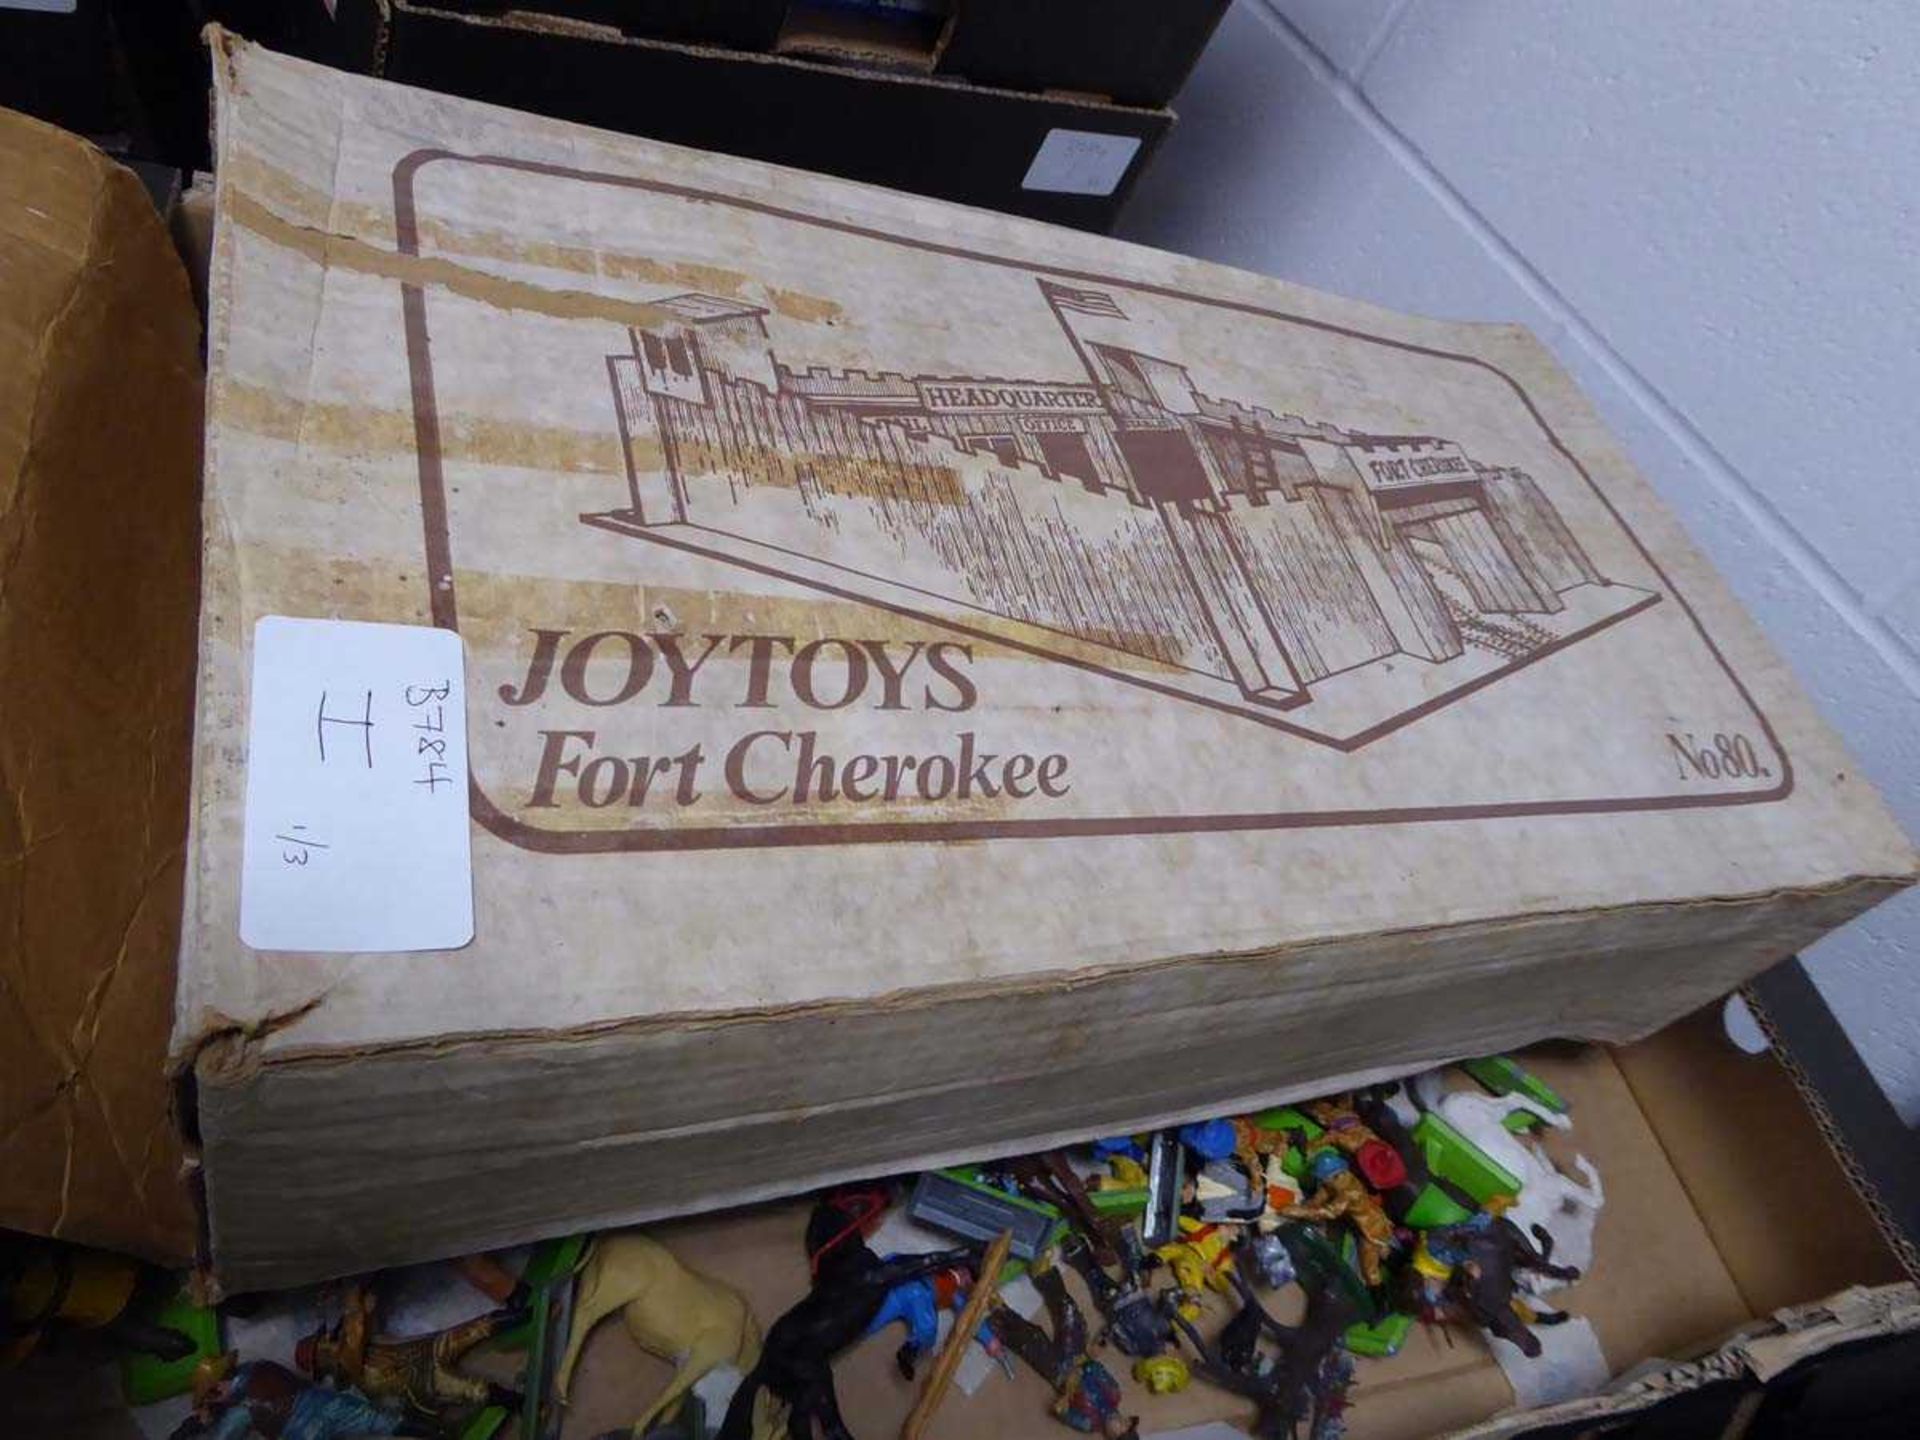 (I) 3 boxes of Britain's Deetail and other figures of Cowboys and Indians, and boxed JoyToys Fort